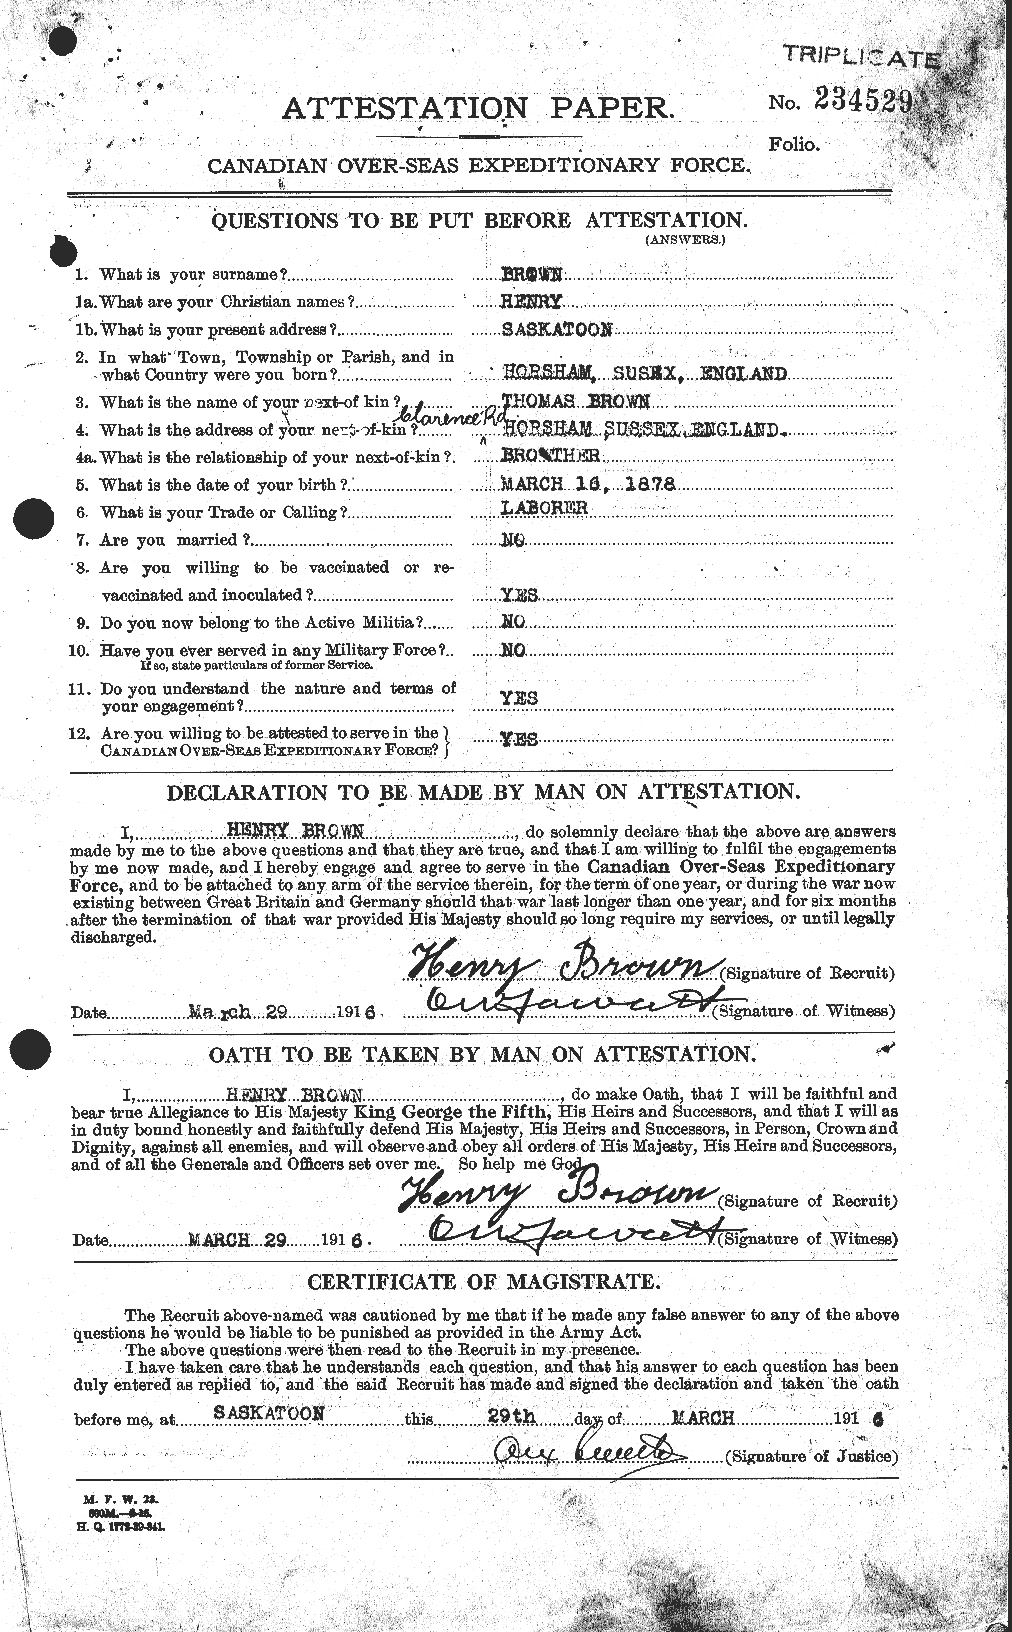 Personnel Records of the First World War - CEF 265505a